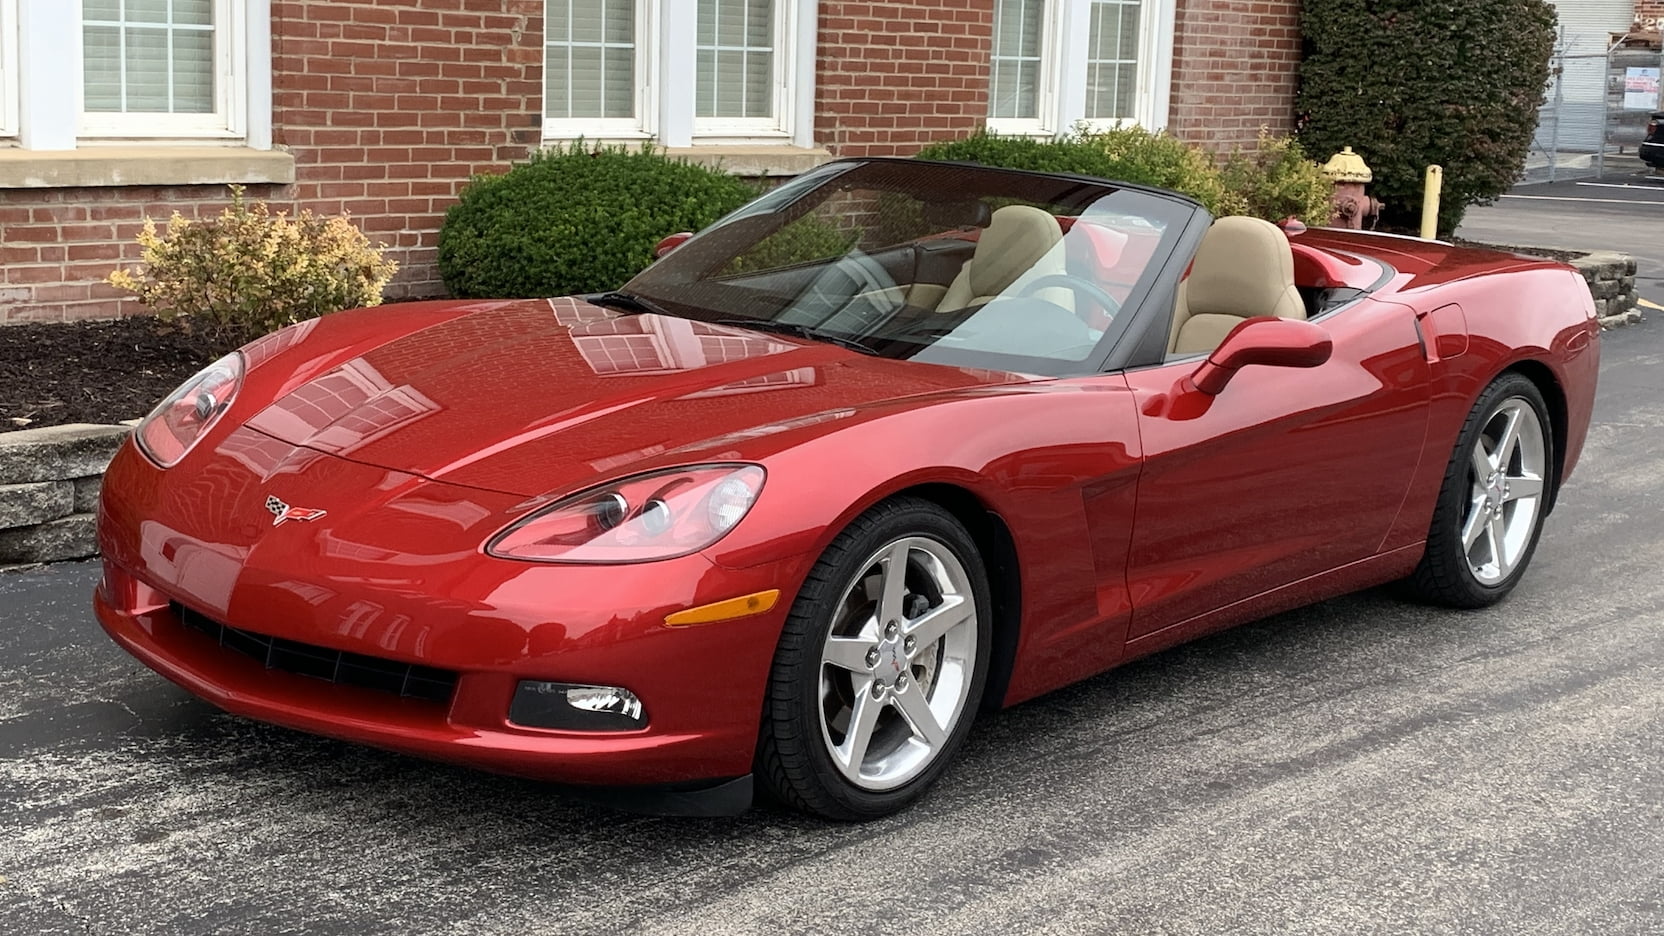 2005 Chevrolet Corvette Convertible | F9.1 | Indy Fall Special 2020